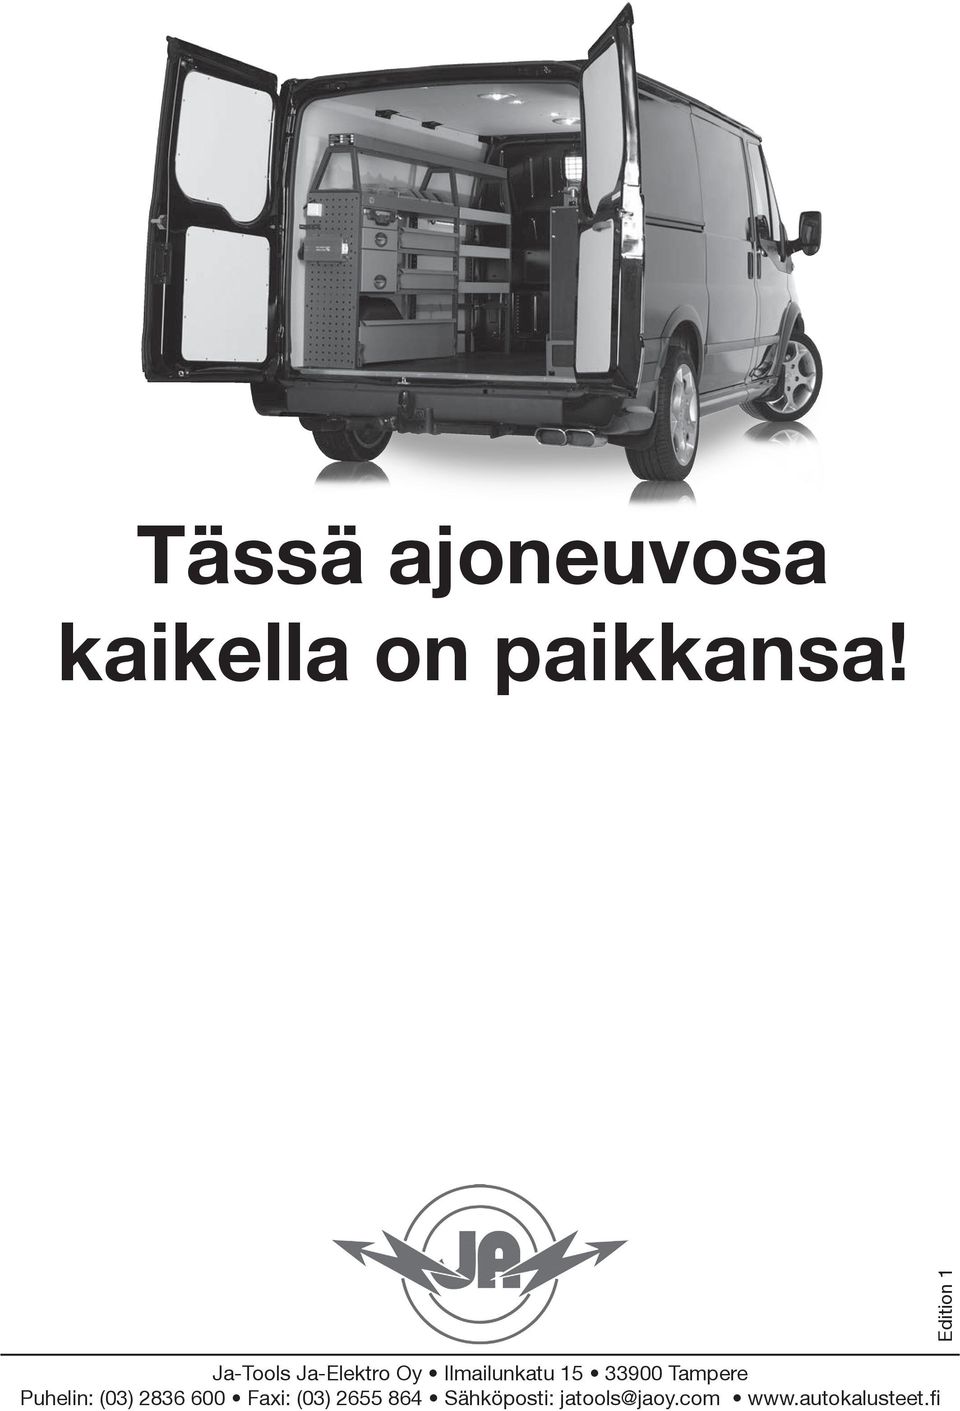 5 900 Tampere Puhelin: (0) 86 600 Faxi: (0)